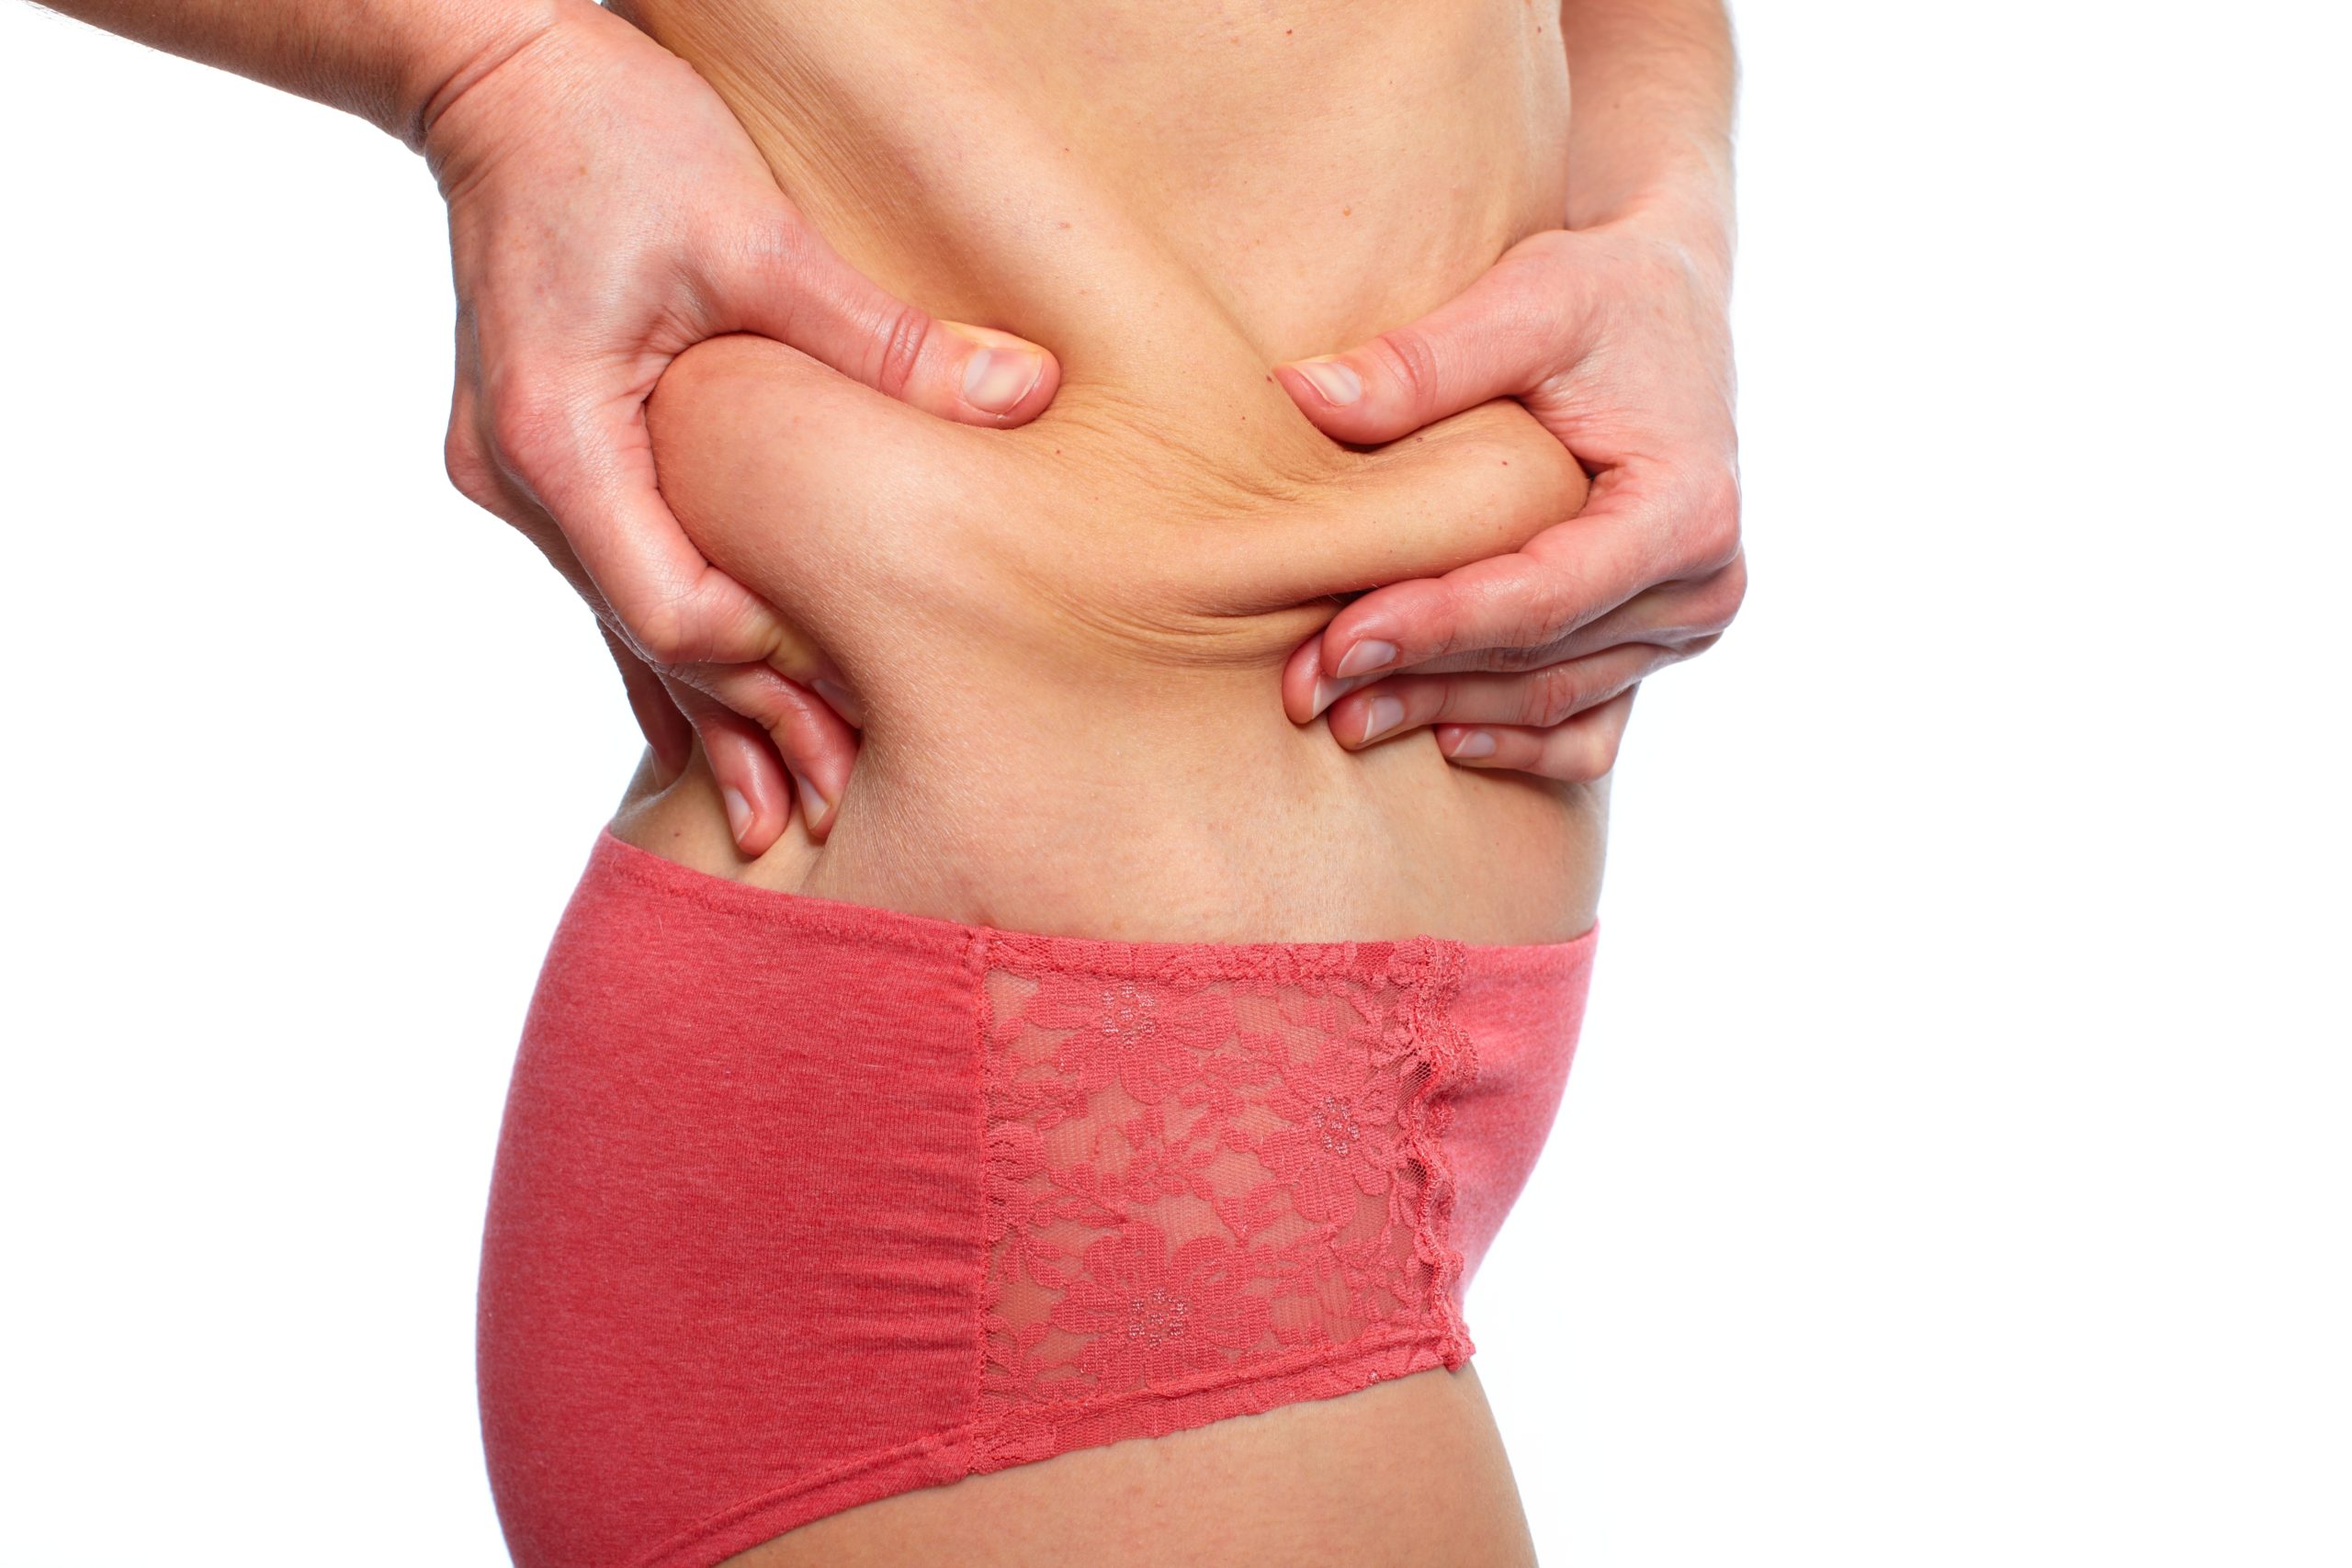 Where are tummy tuck scars? - Power Plastic Surgery